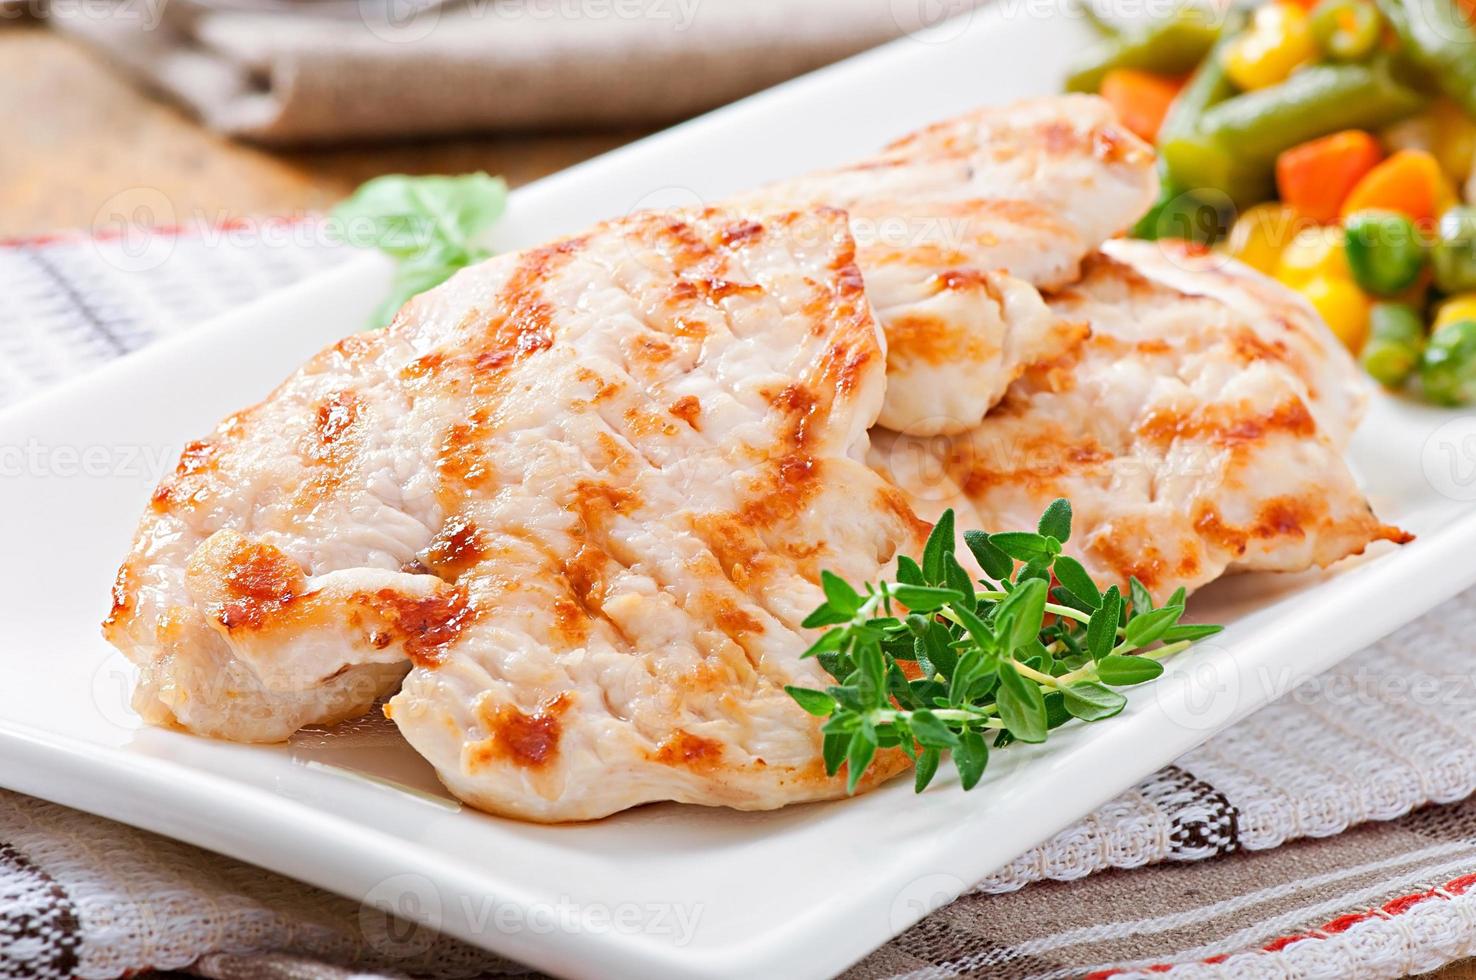 Grilled chicken breasts and vegetables photo